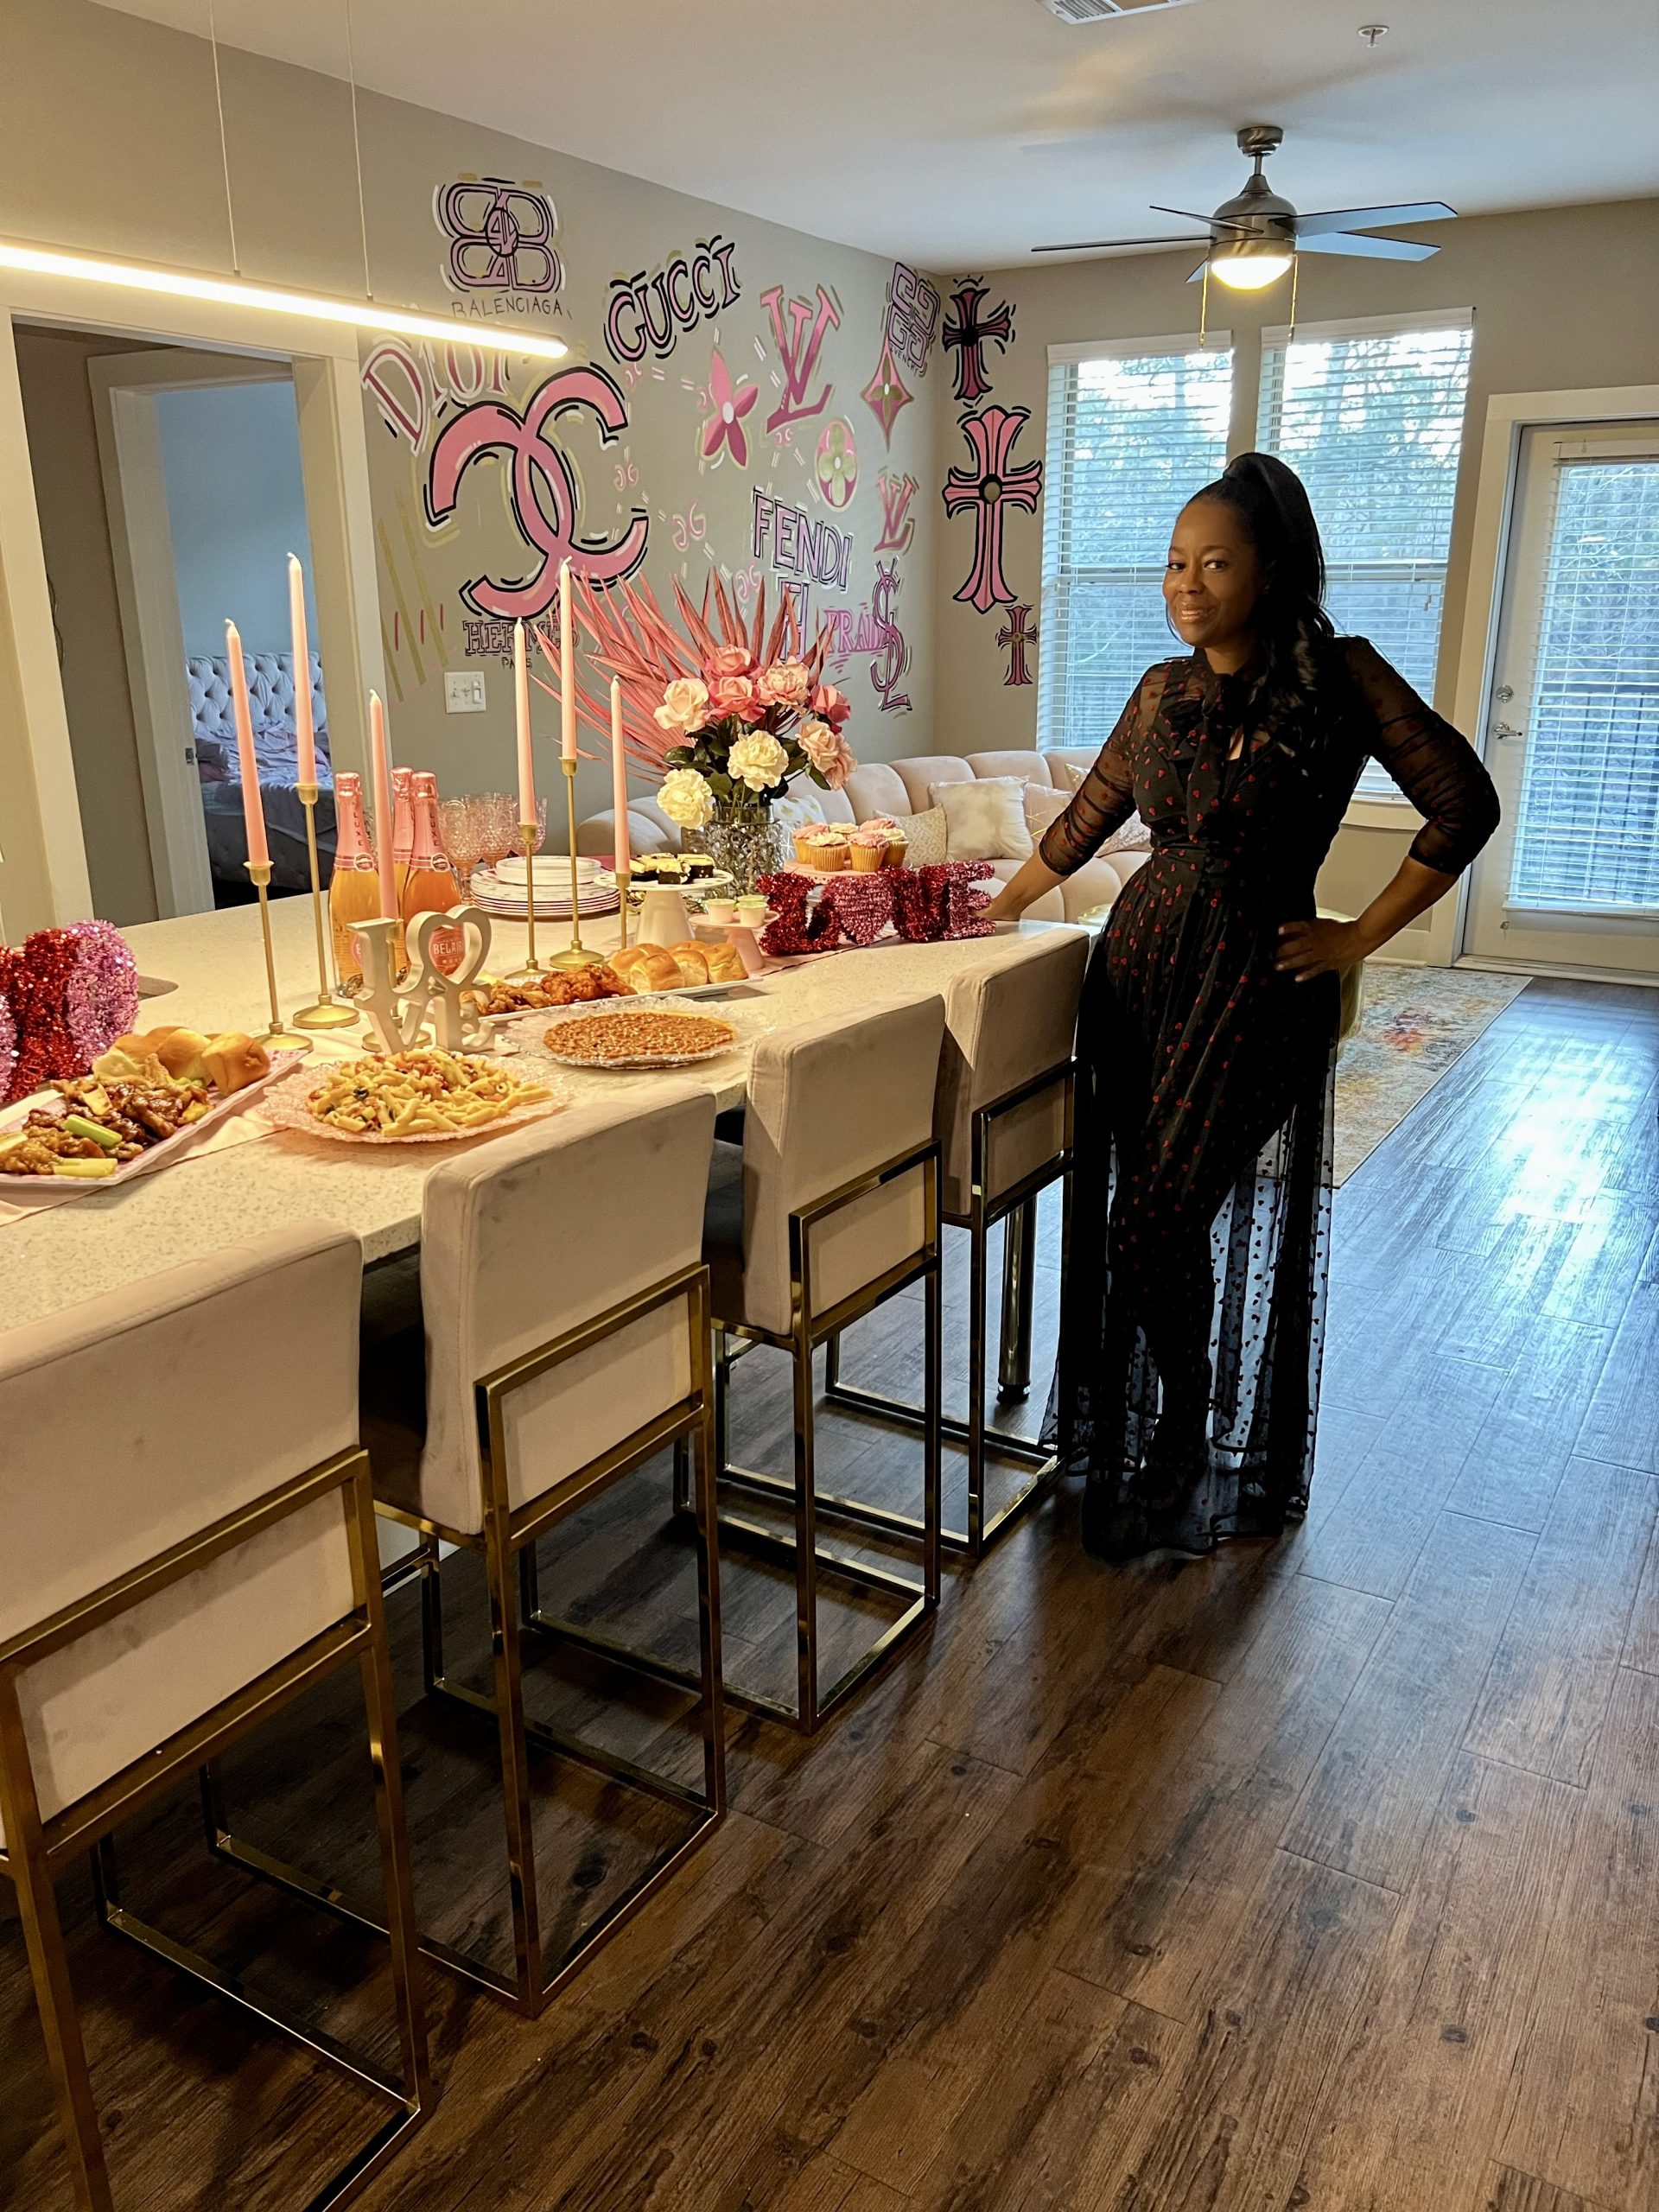 Tyra’s 1st Annual Galentine’s Day Party